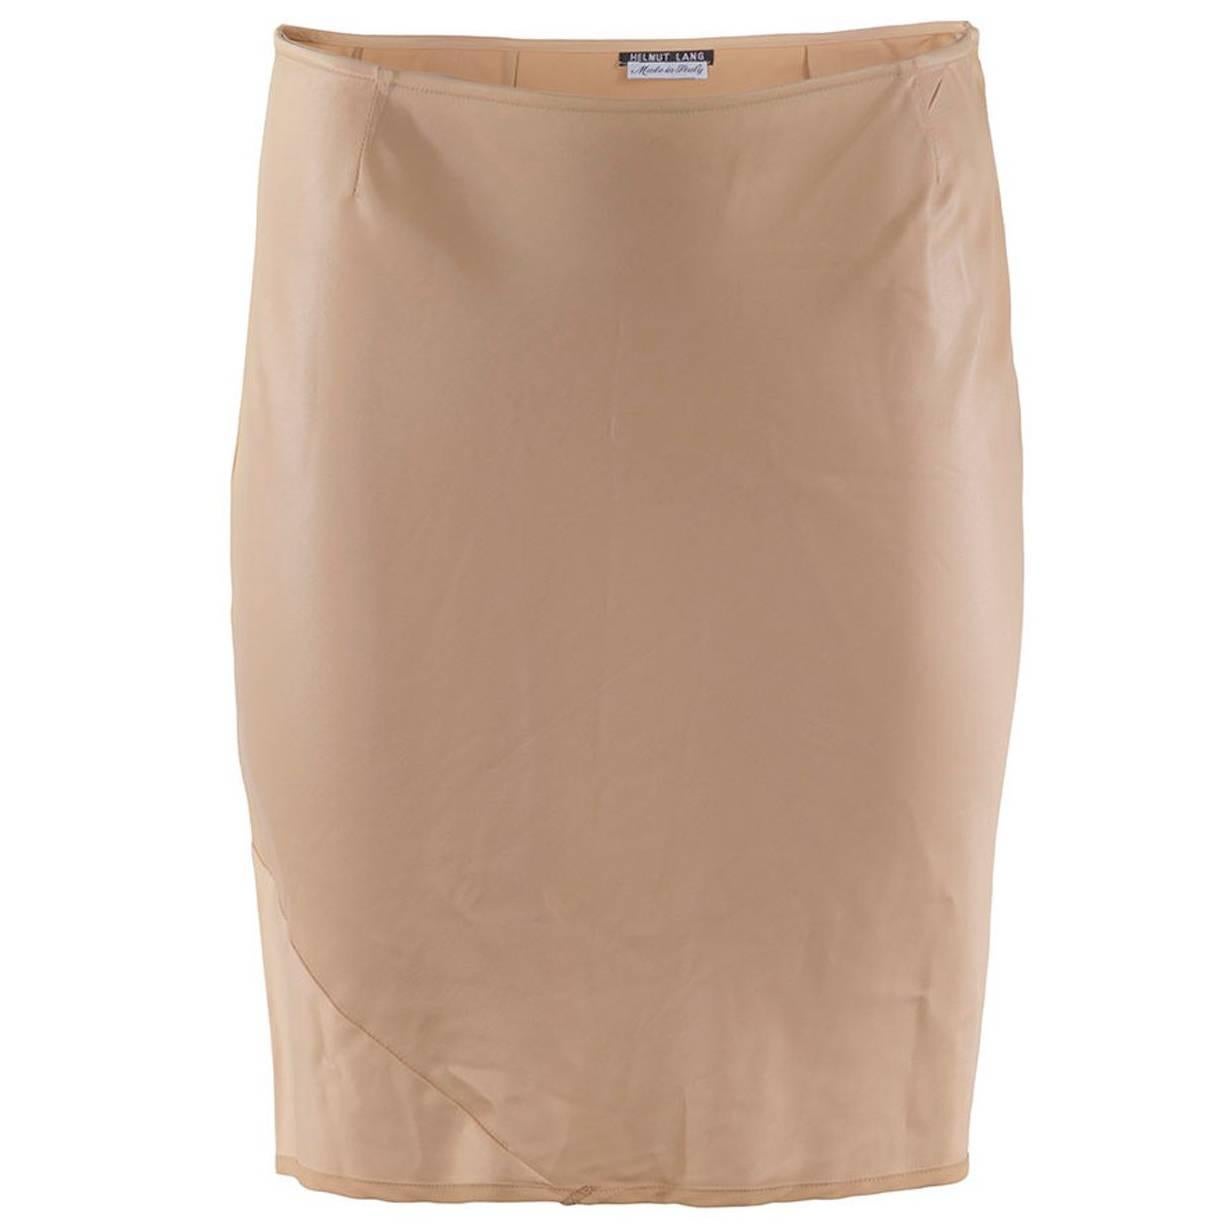 1990's Helmut Lang Fitted Short Pencil Skirt